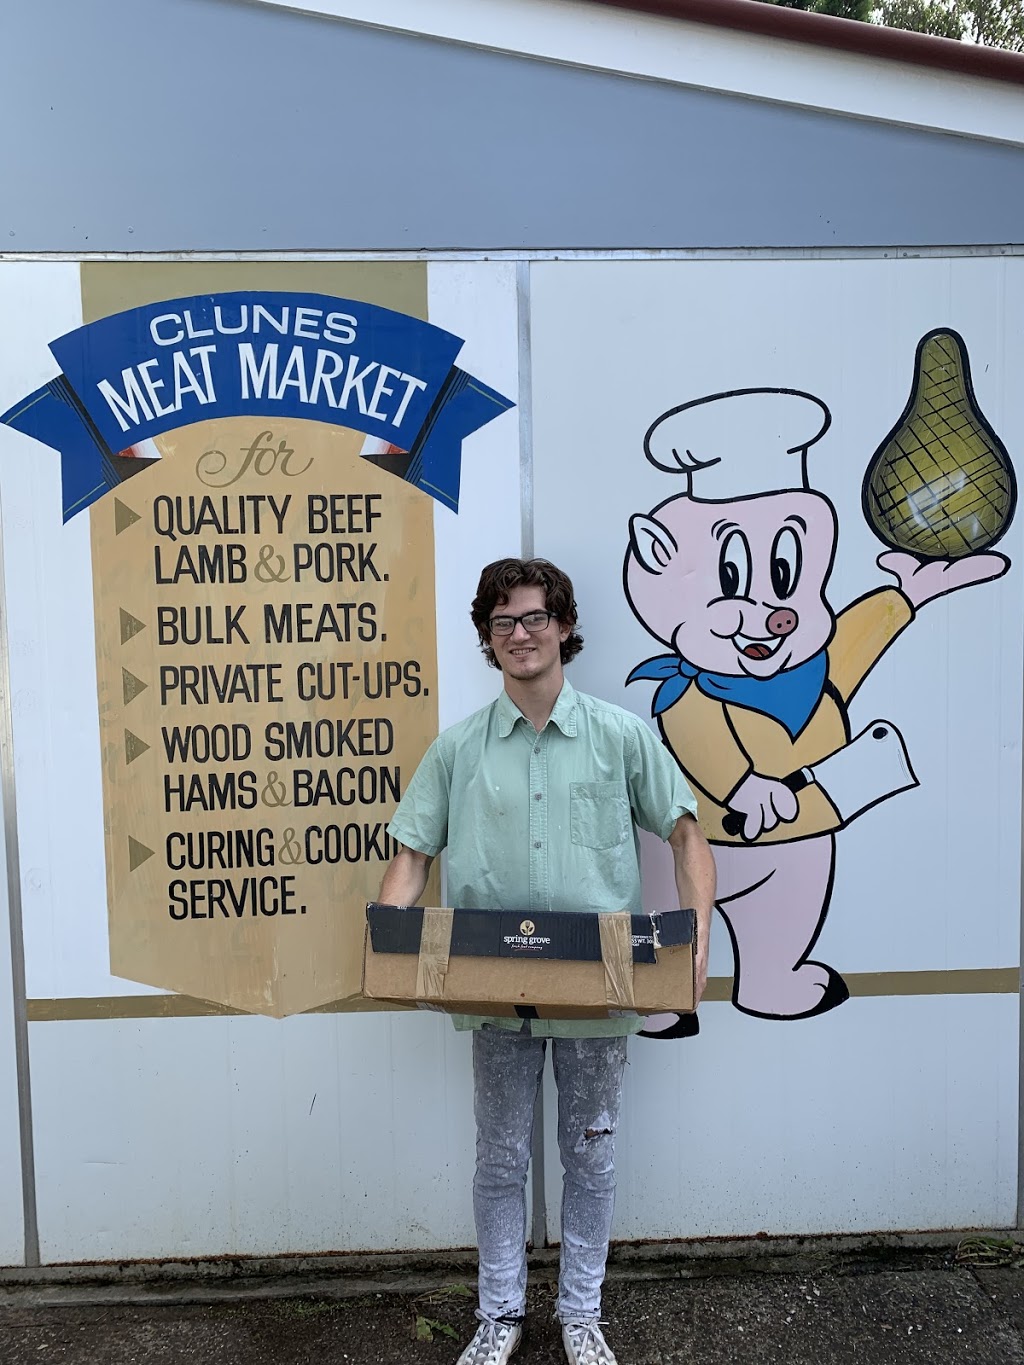 Clunes Meat Market | food | 57 Main St, Clunes NSW 2480, Australia | 0266291359 OR +61 2 6629 1359